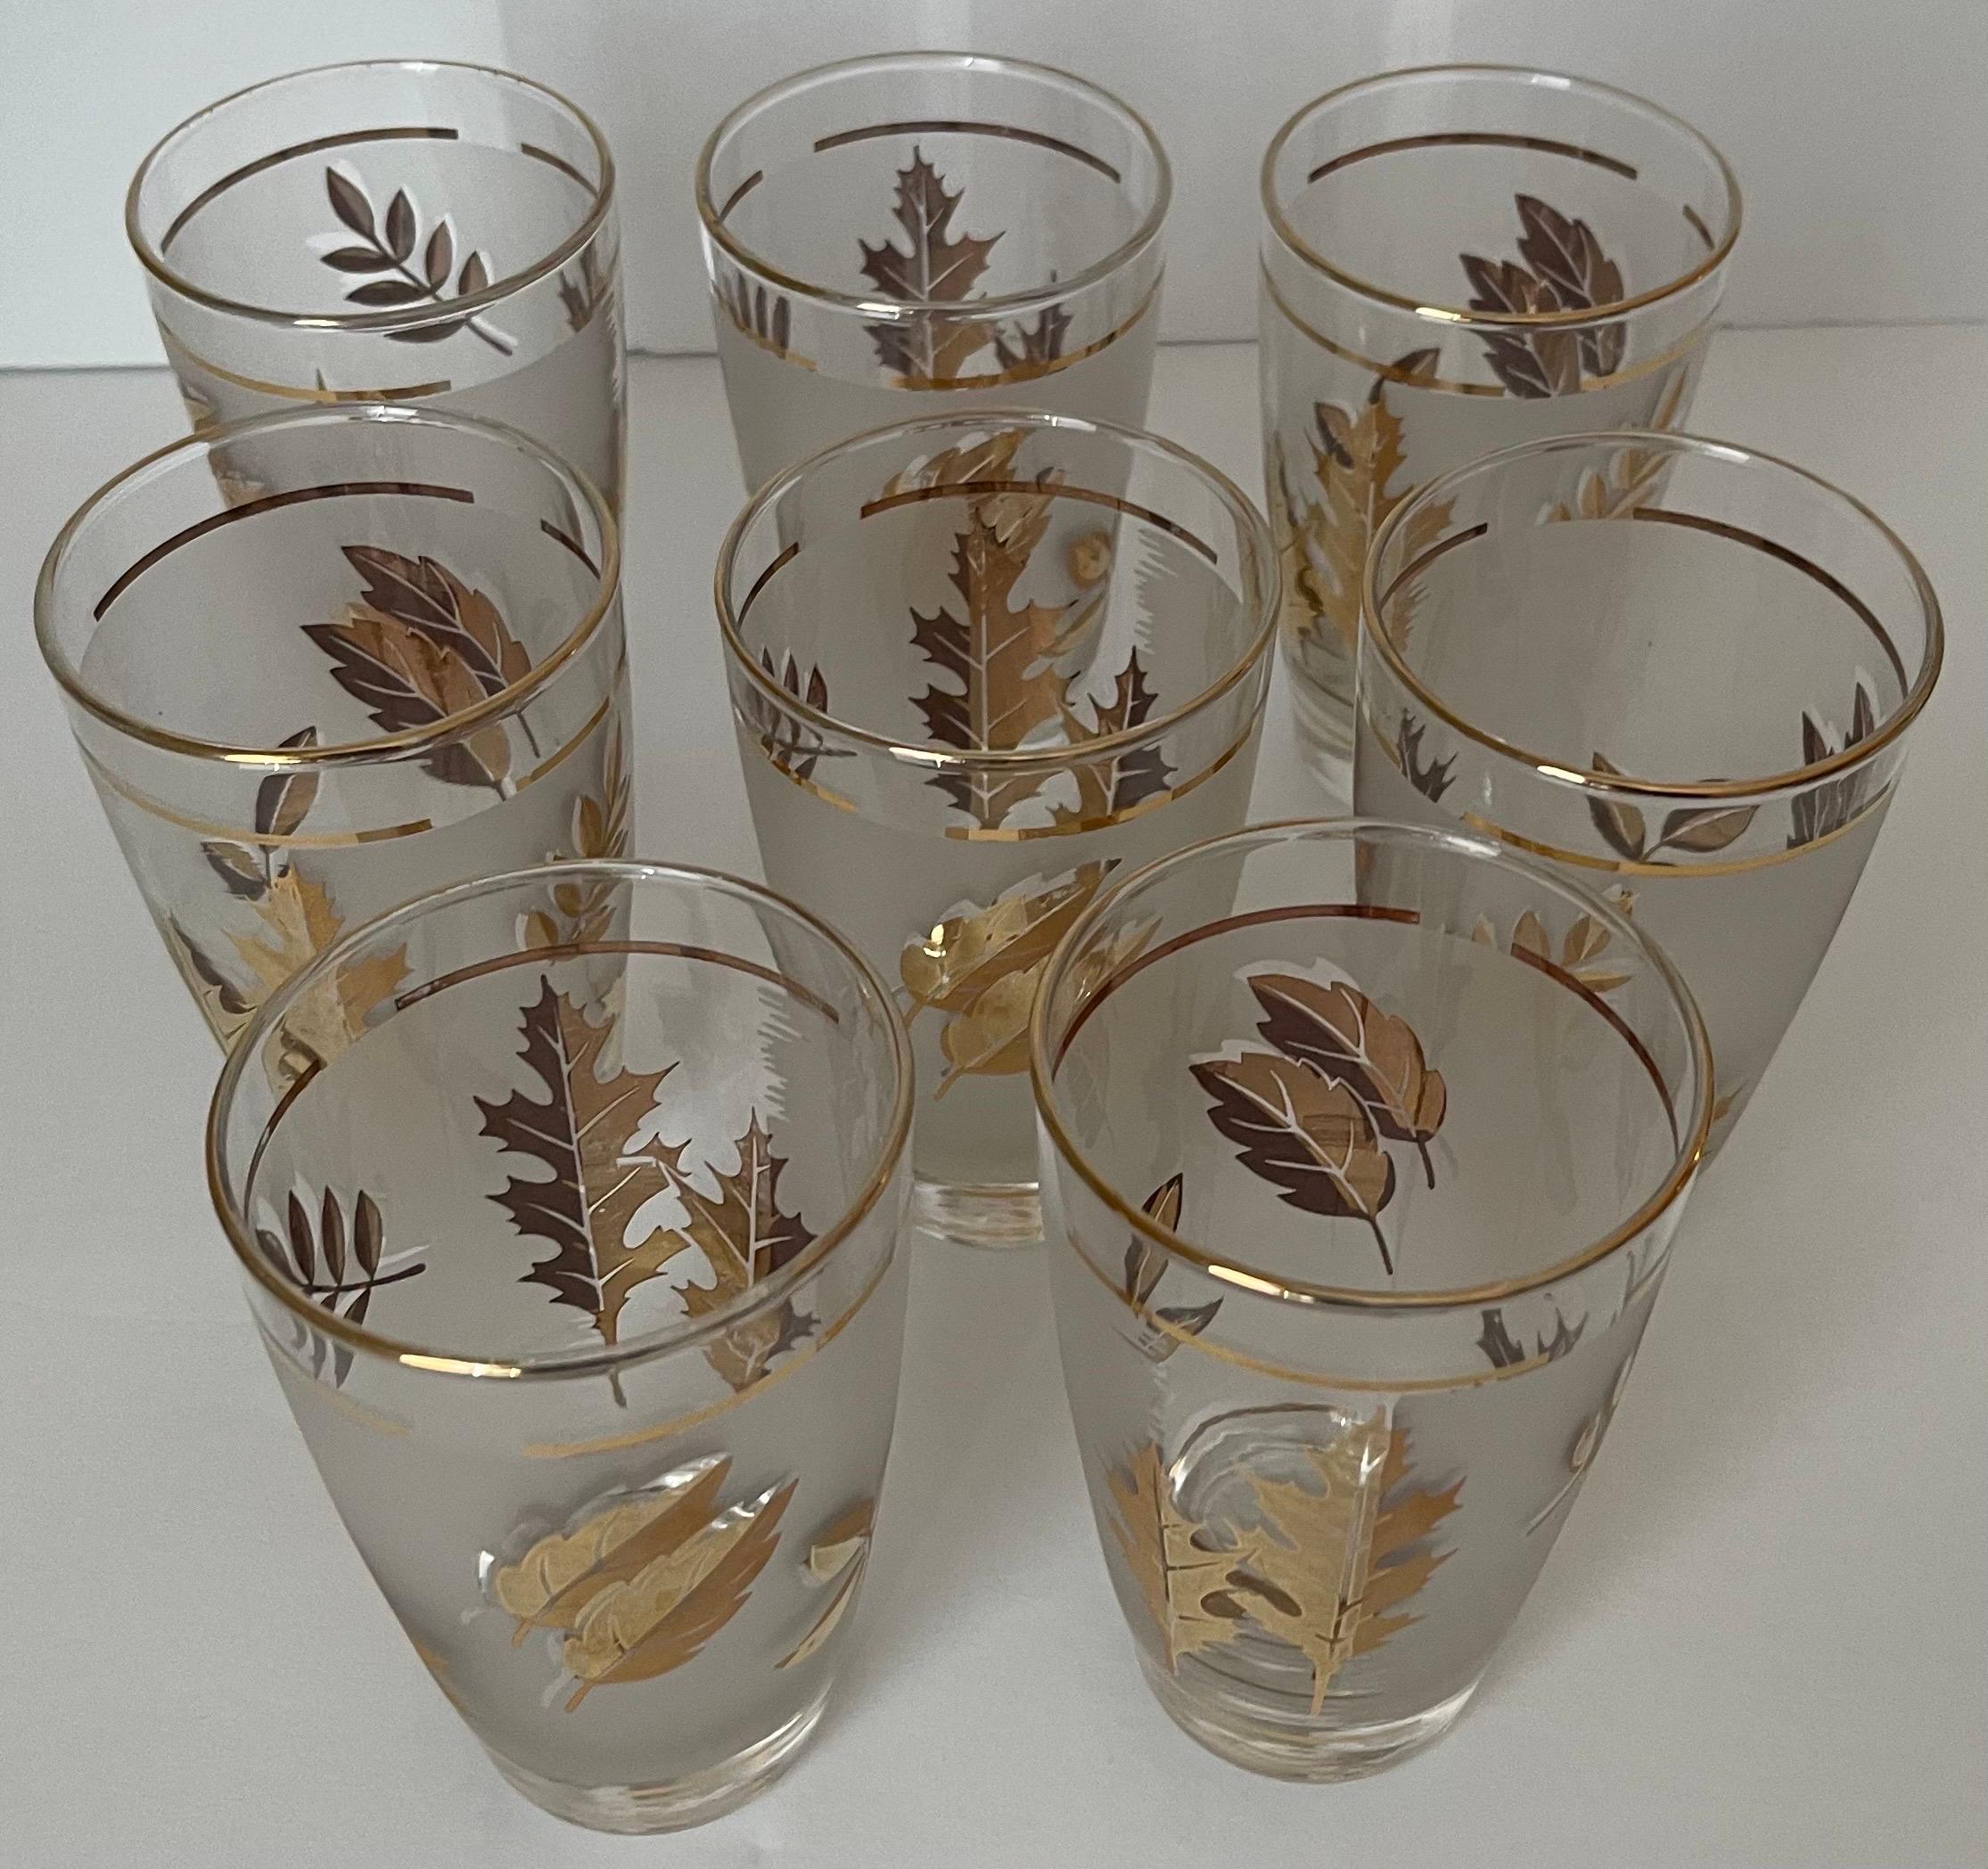 Golden Foliage Leaf Highball Glasses Set of 8 and Ice Bucket by Libby Glass 2